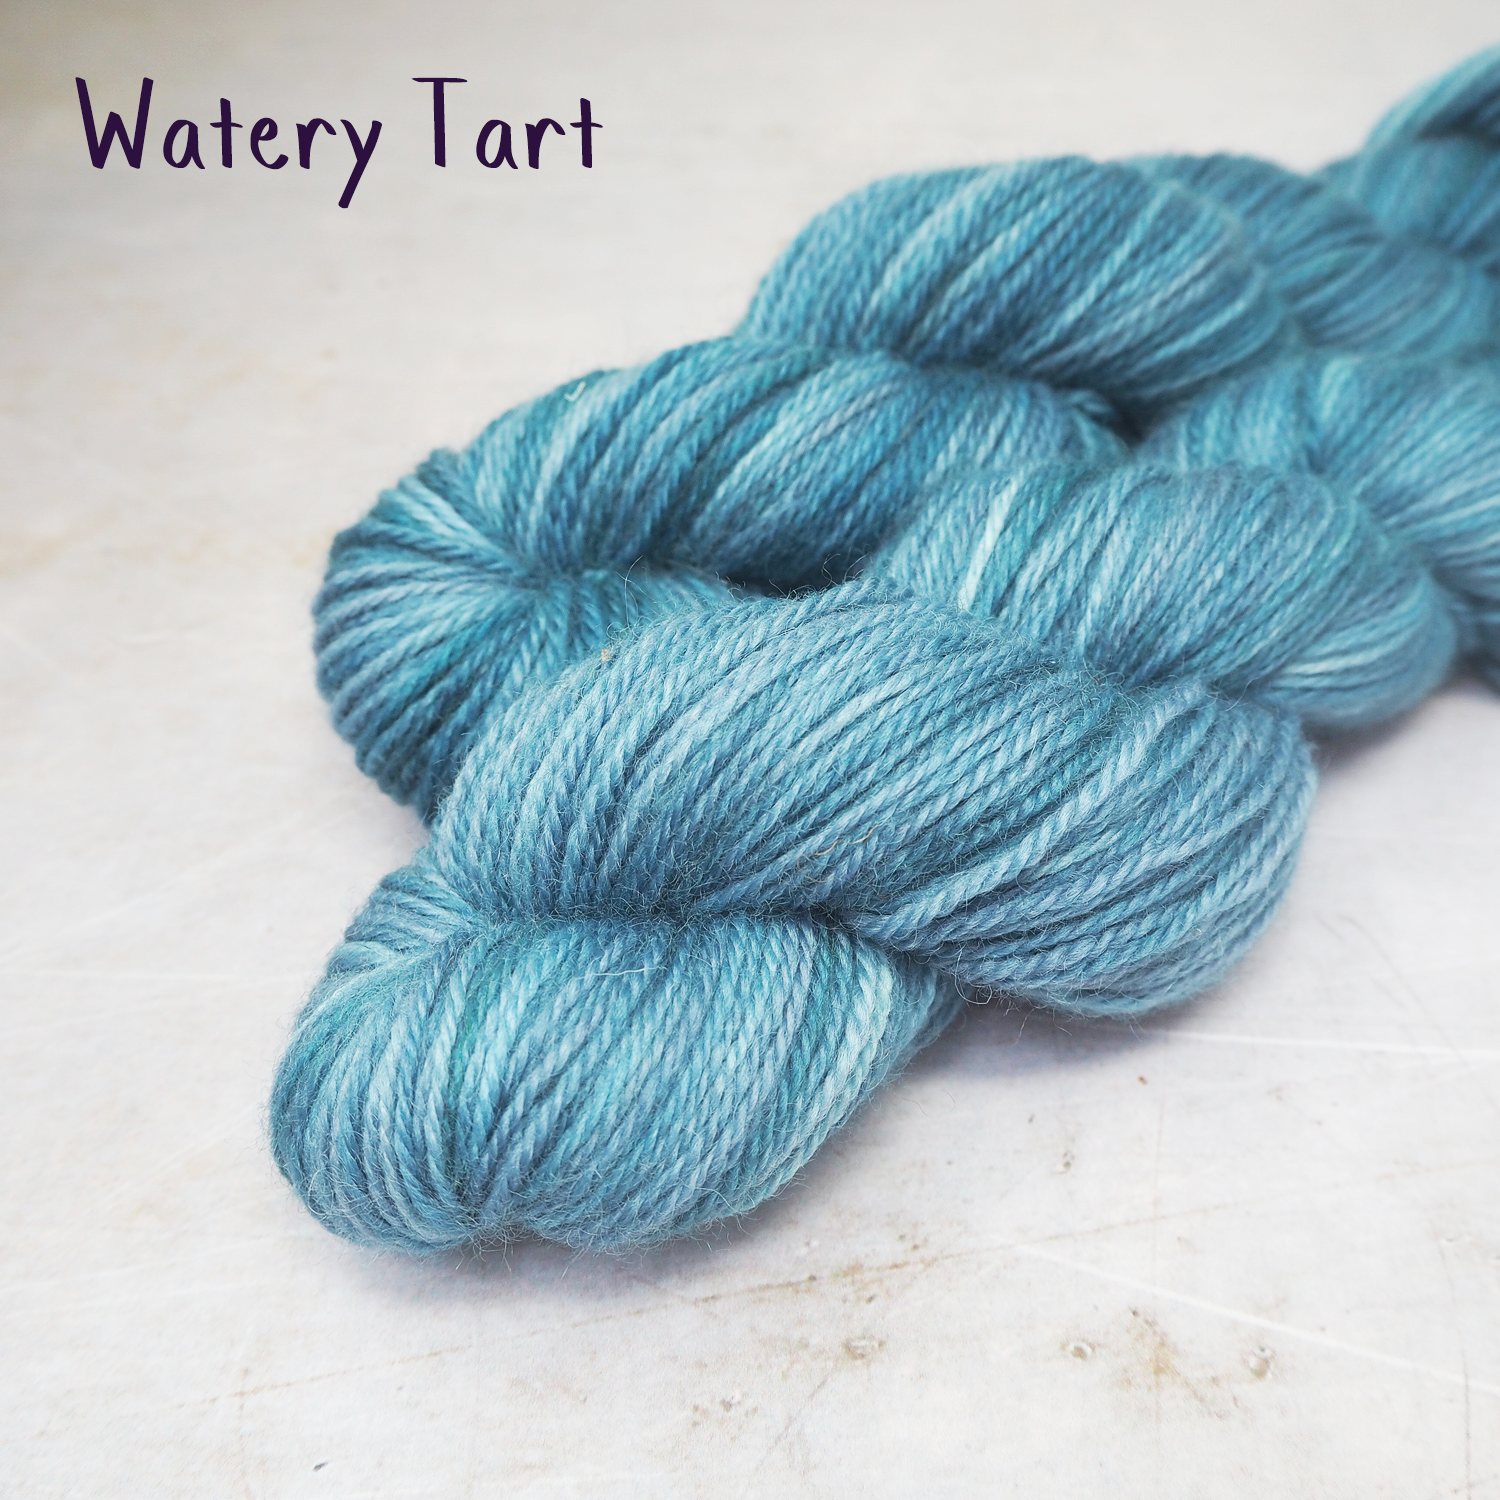 Two skeins of soft, DK-weight yarn, hand-dyed in variegated mid-blues. 